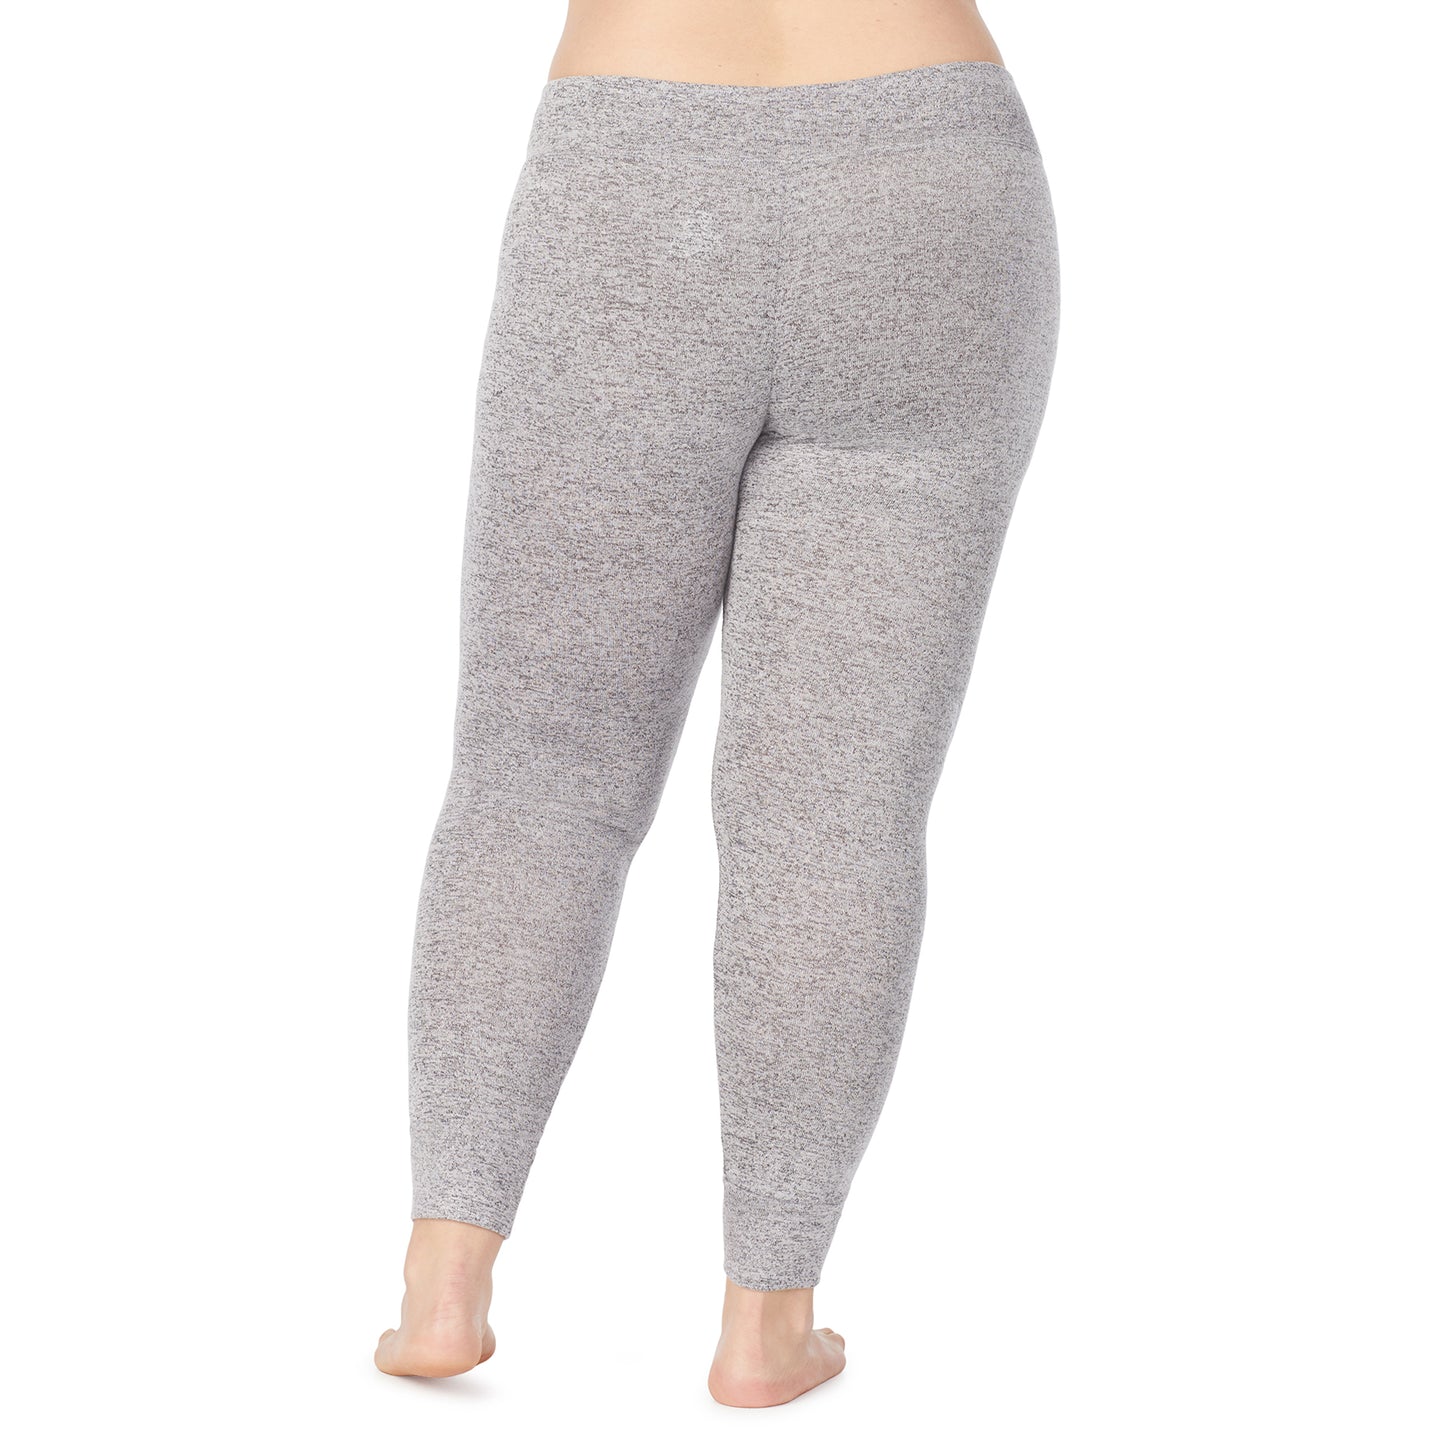 Marled Grey; Model is wearing size 1X. She is 5'9", Bust 38", Waist 36", Hips 48.5". @A lady wearing a marled grey legging plus.